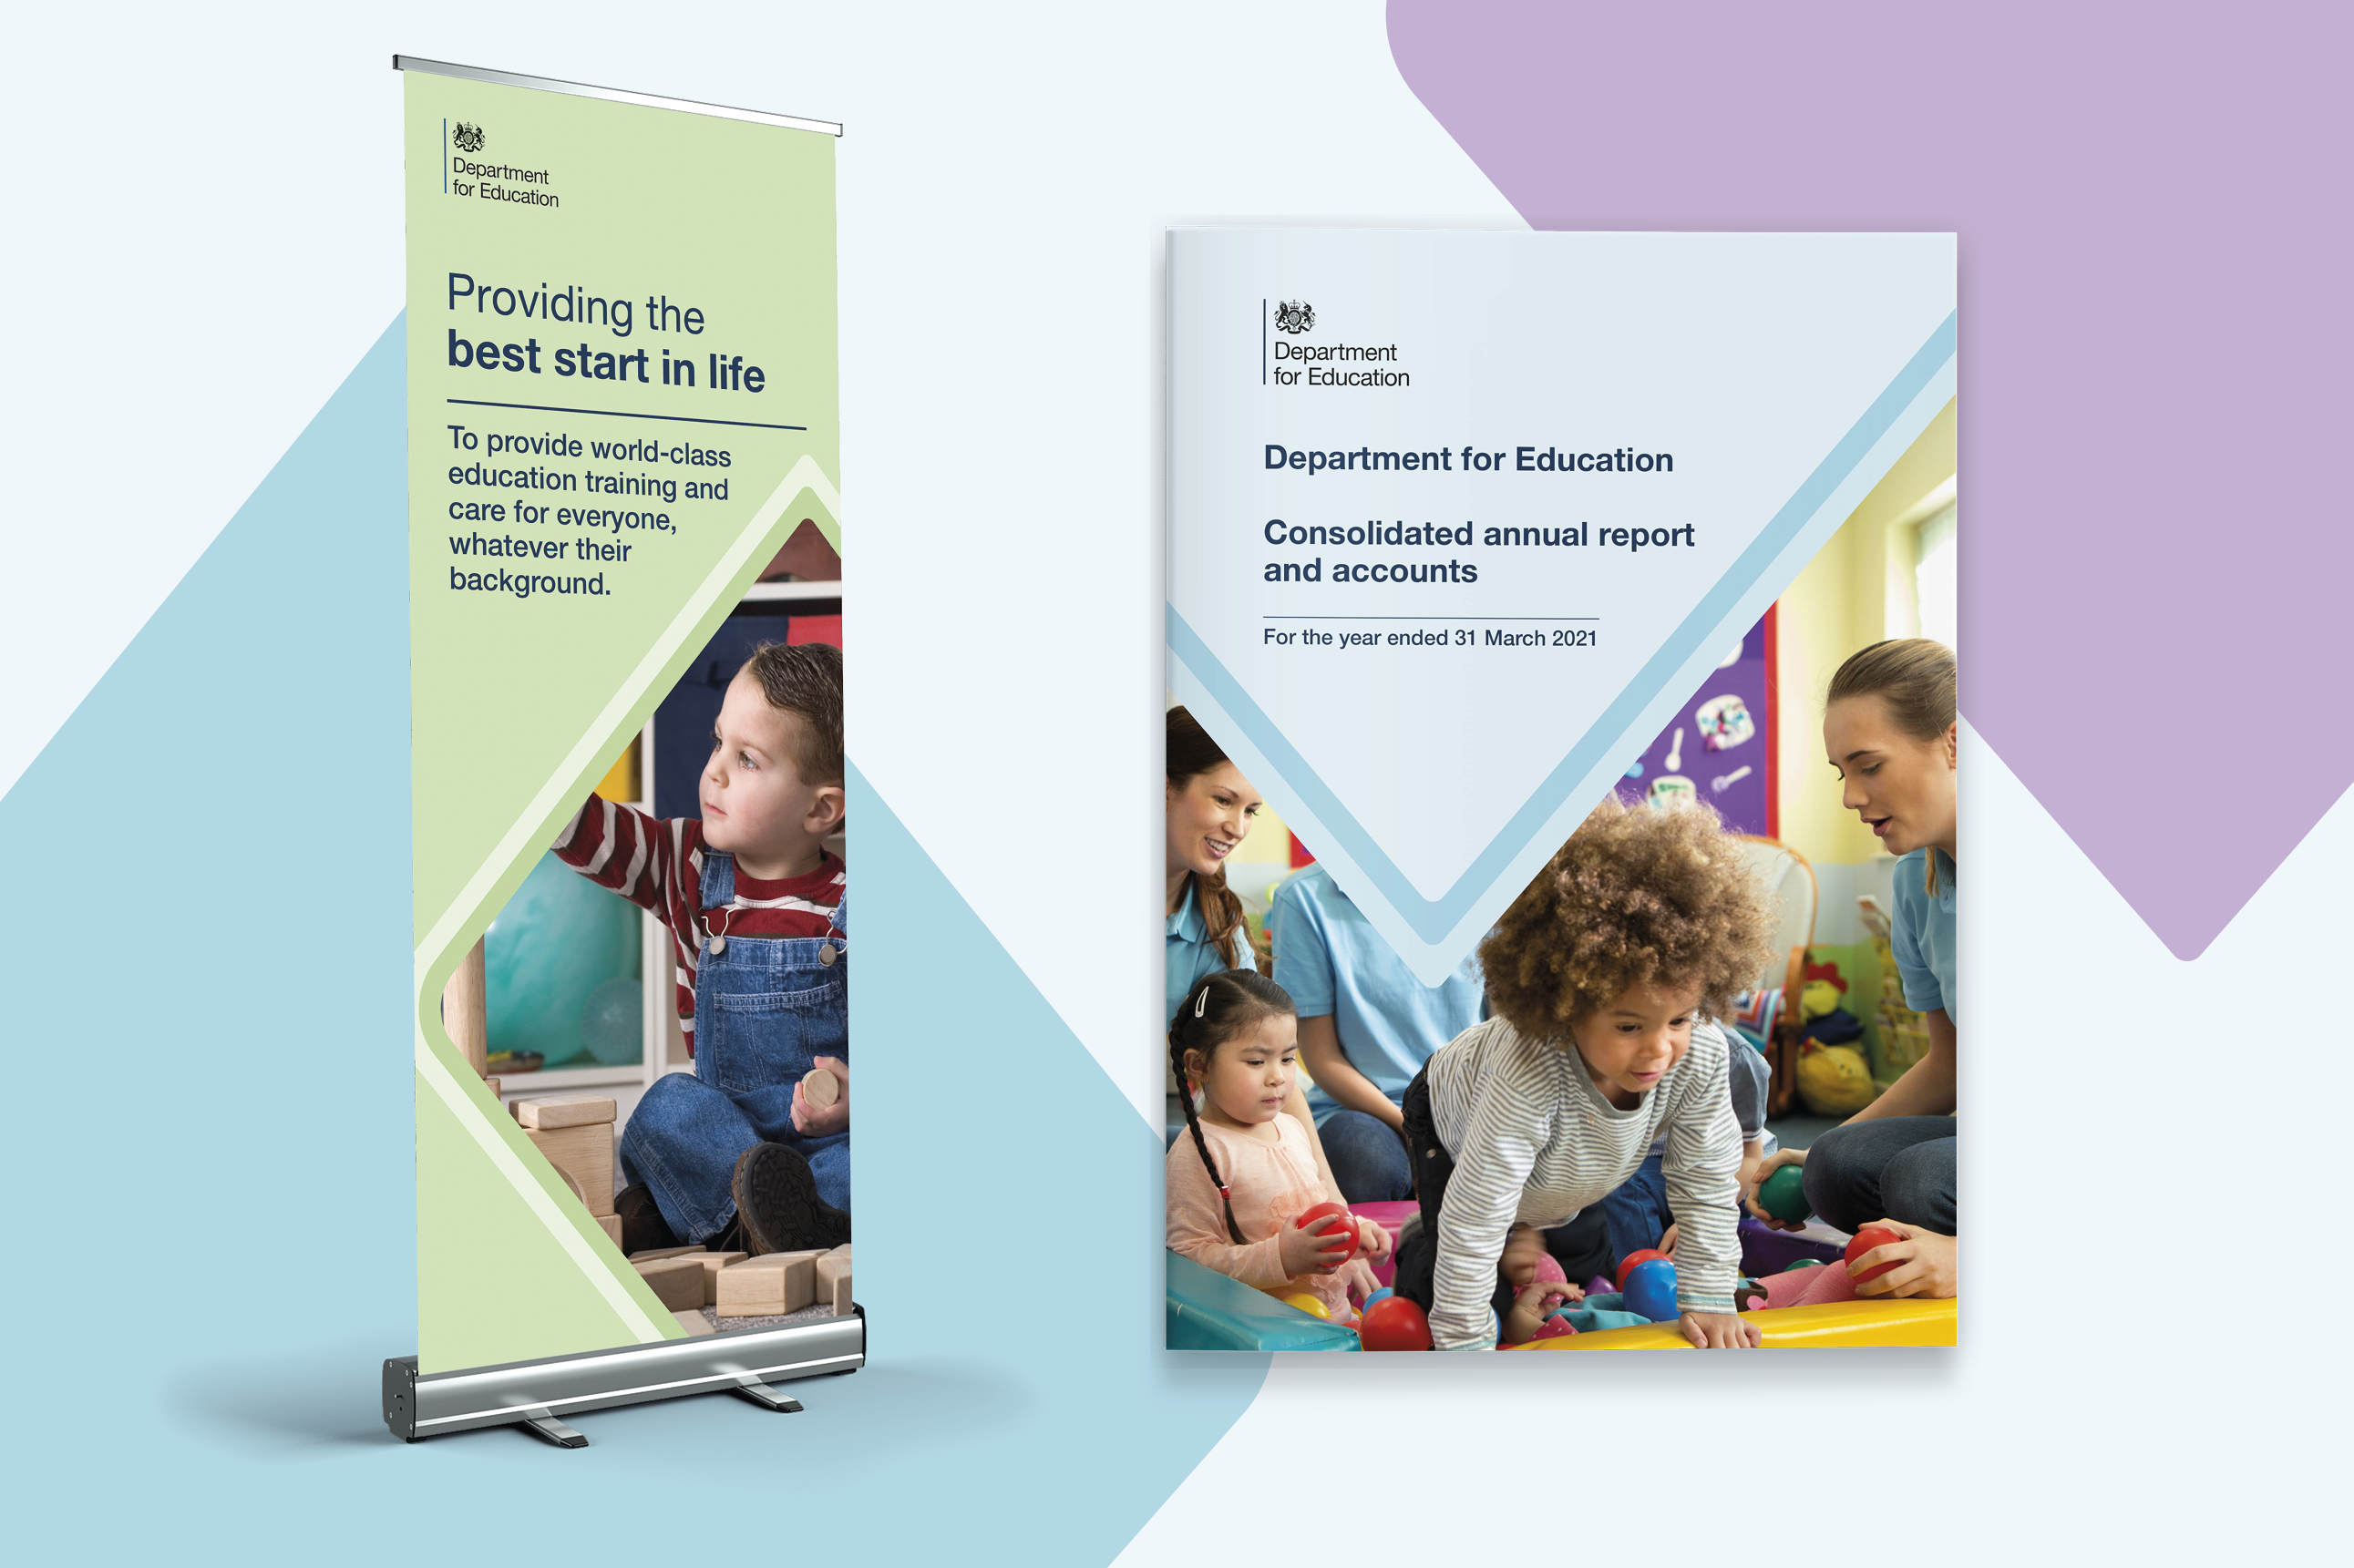 Department for Education poster featuring an image of a child playing with blocks and with written text stating: Providing the best start in life, To provide world-class education training and care for everyone, whatever their background. To the right, Department for Education Consolidated annual report and accounts front page for the year ended 31 March 2021, featuring two women and two children playing in a ball pit